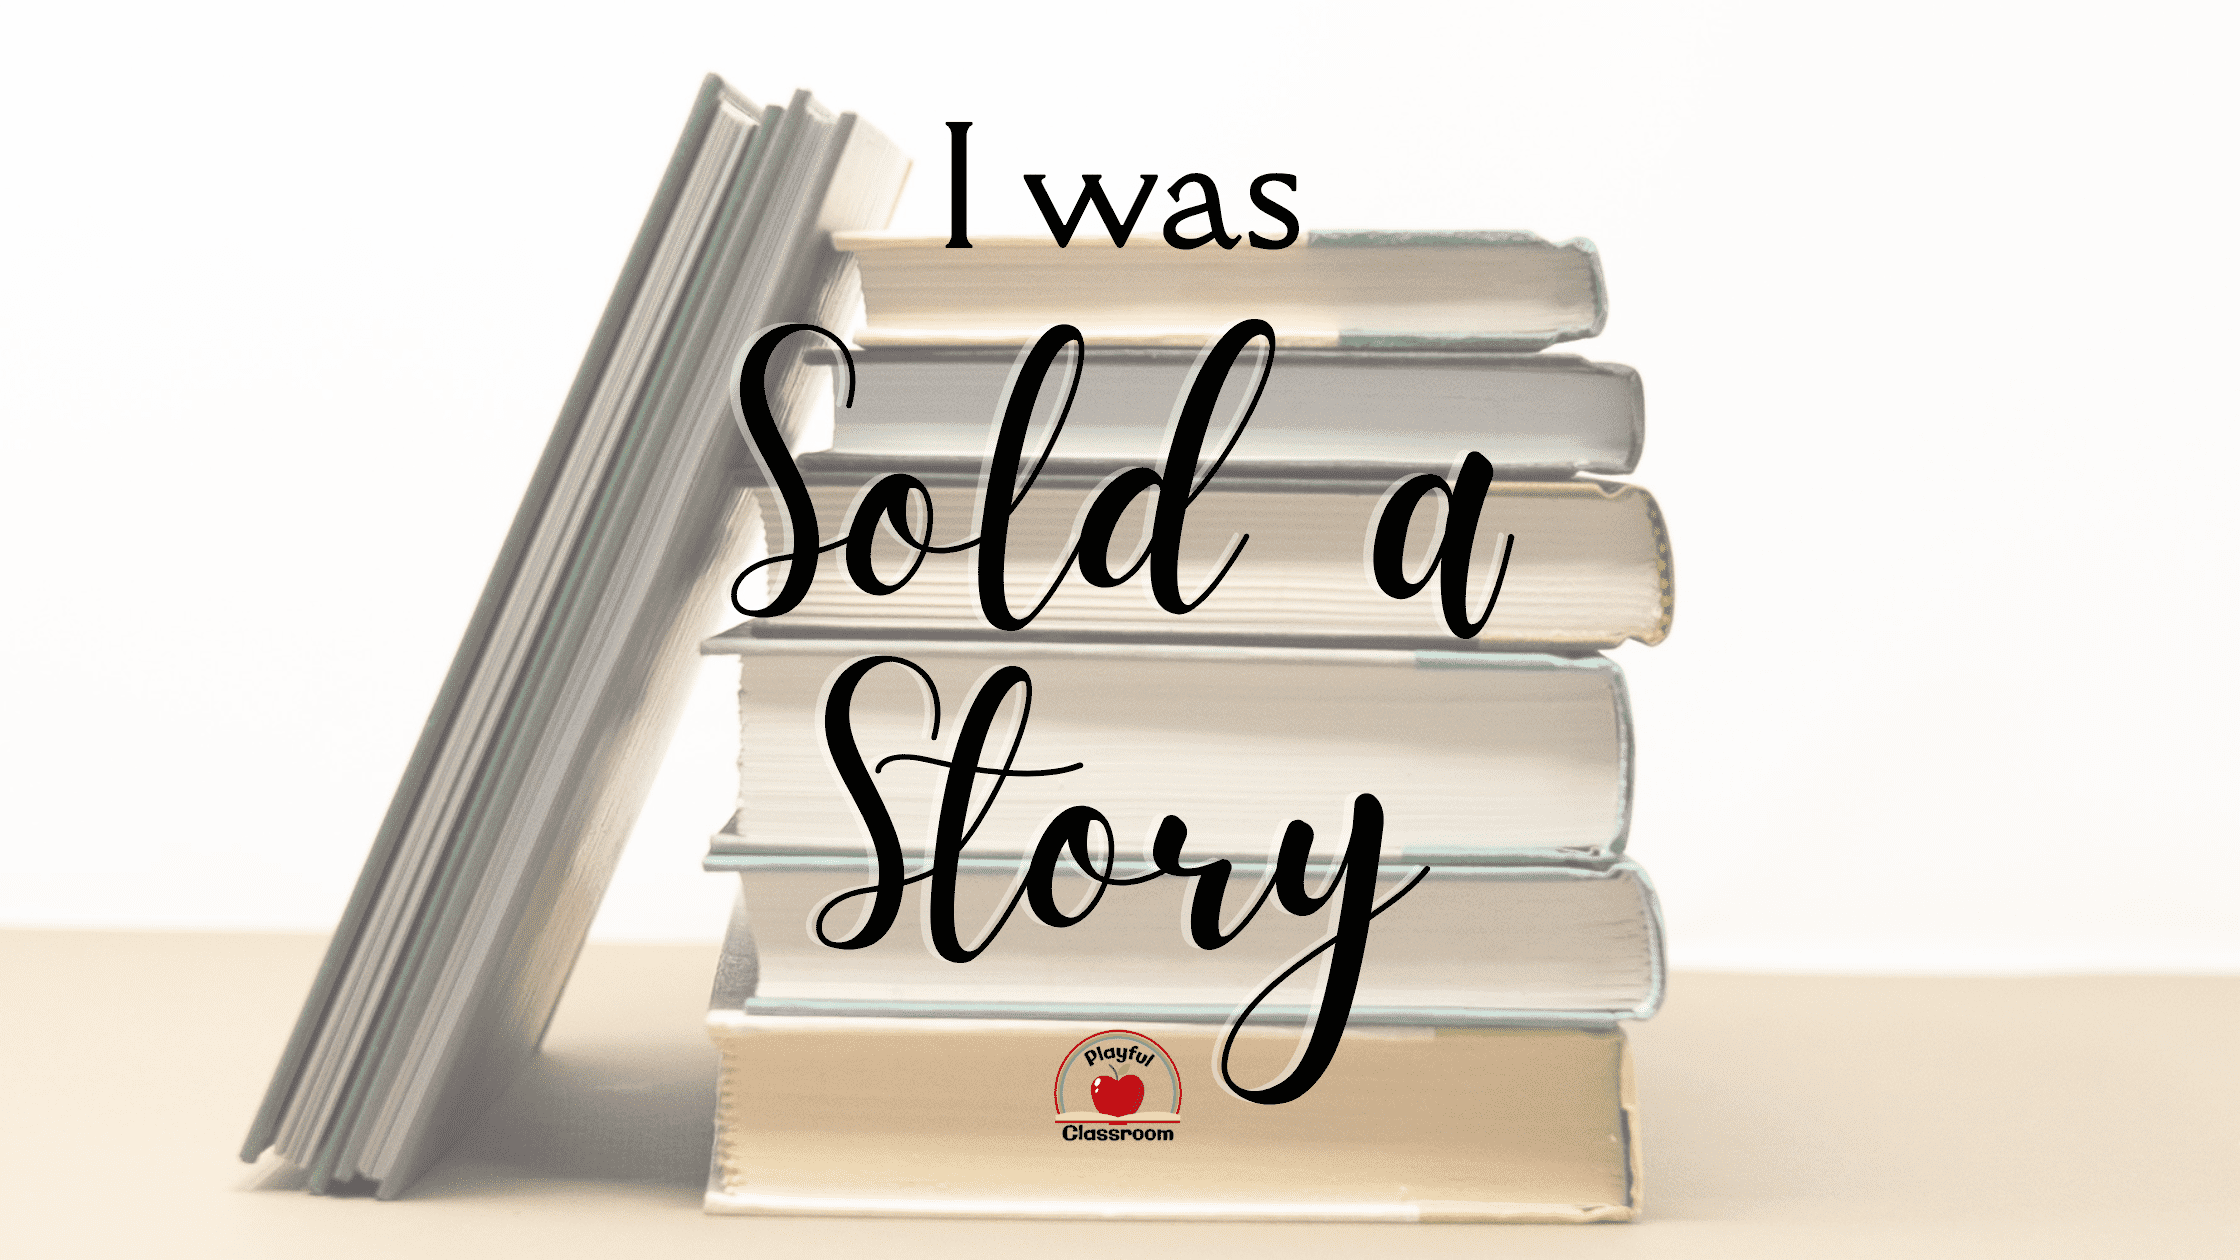 I was Sold a Story